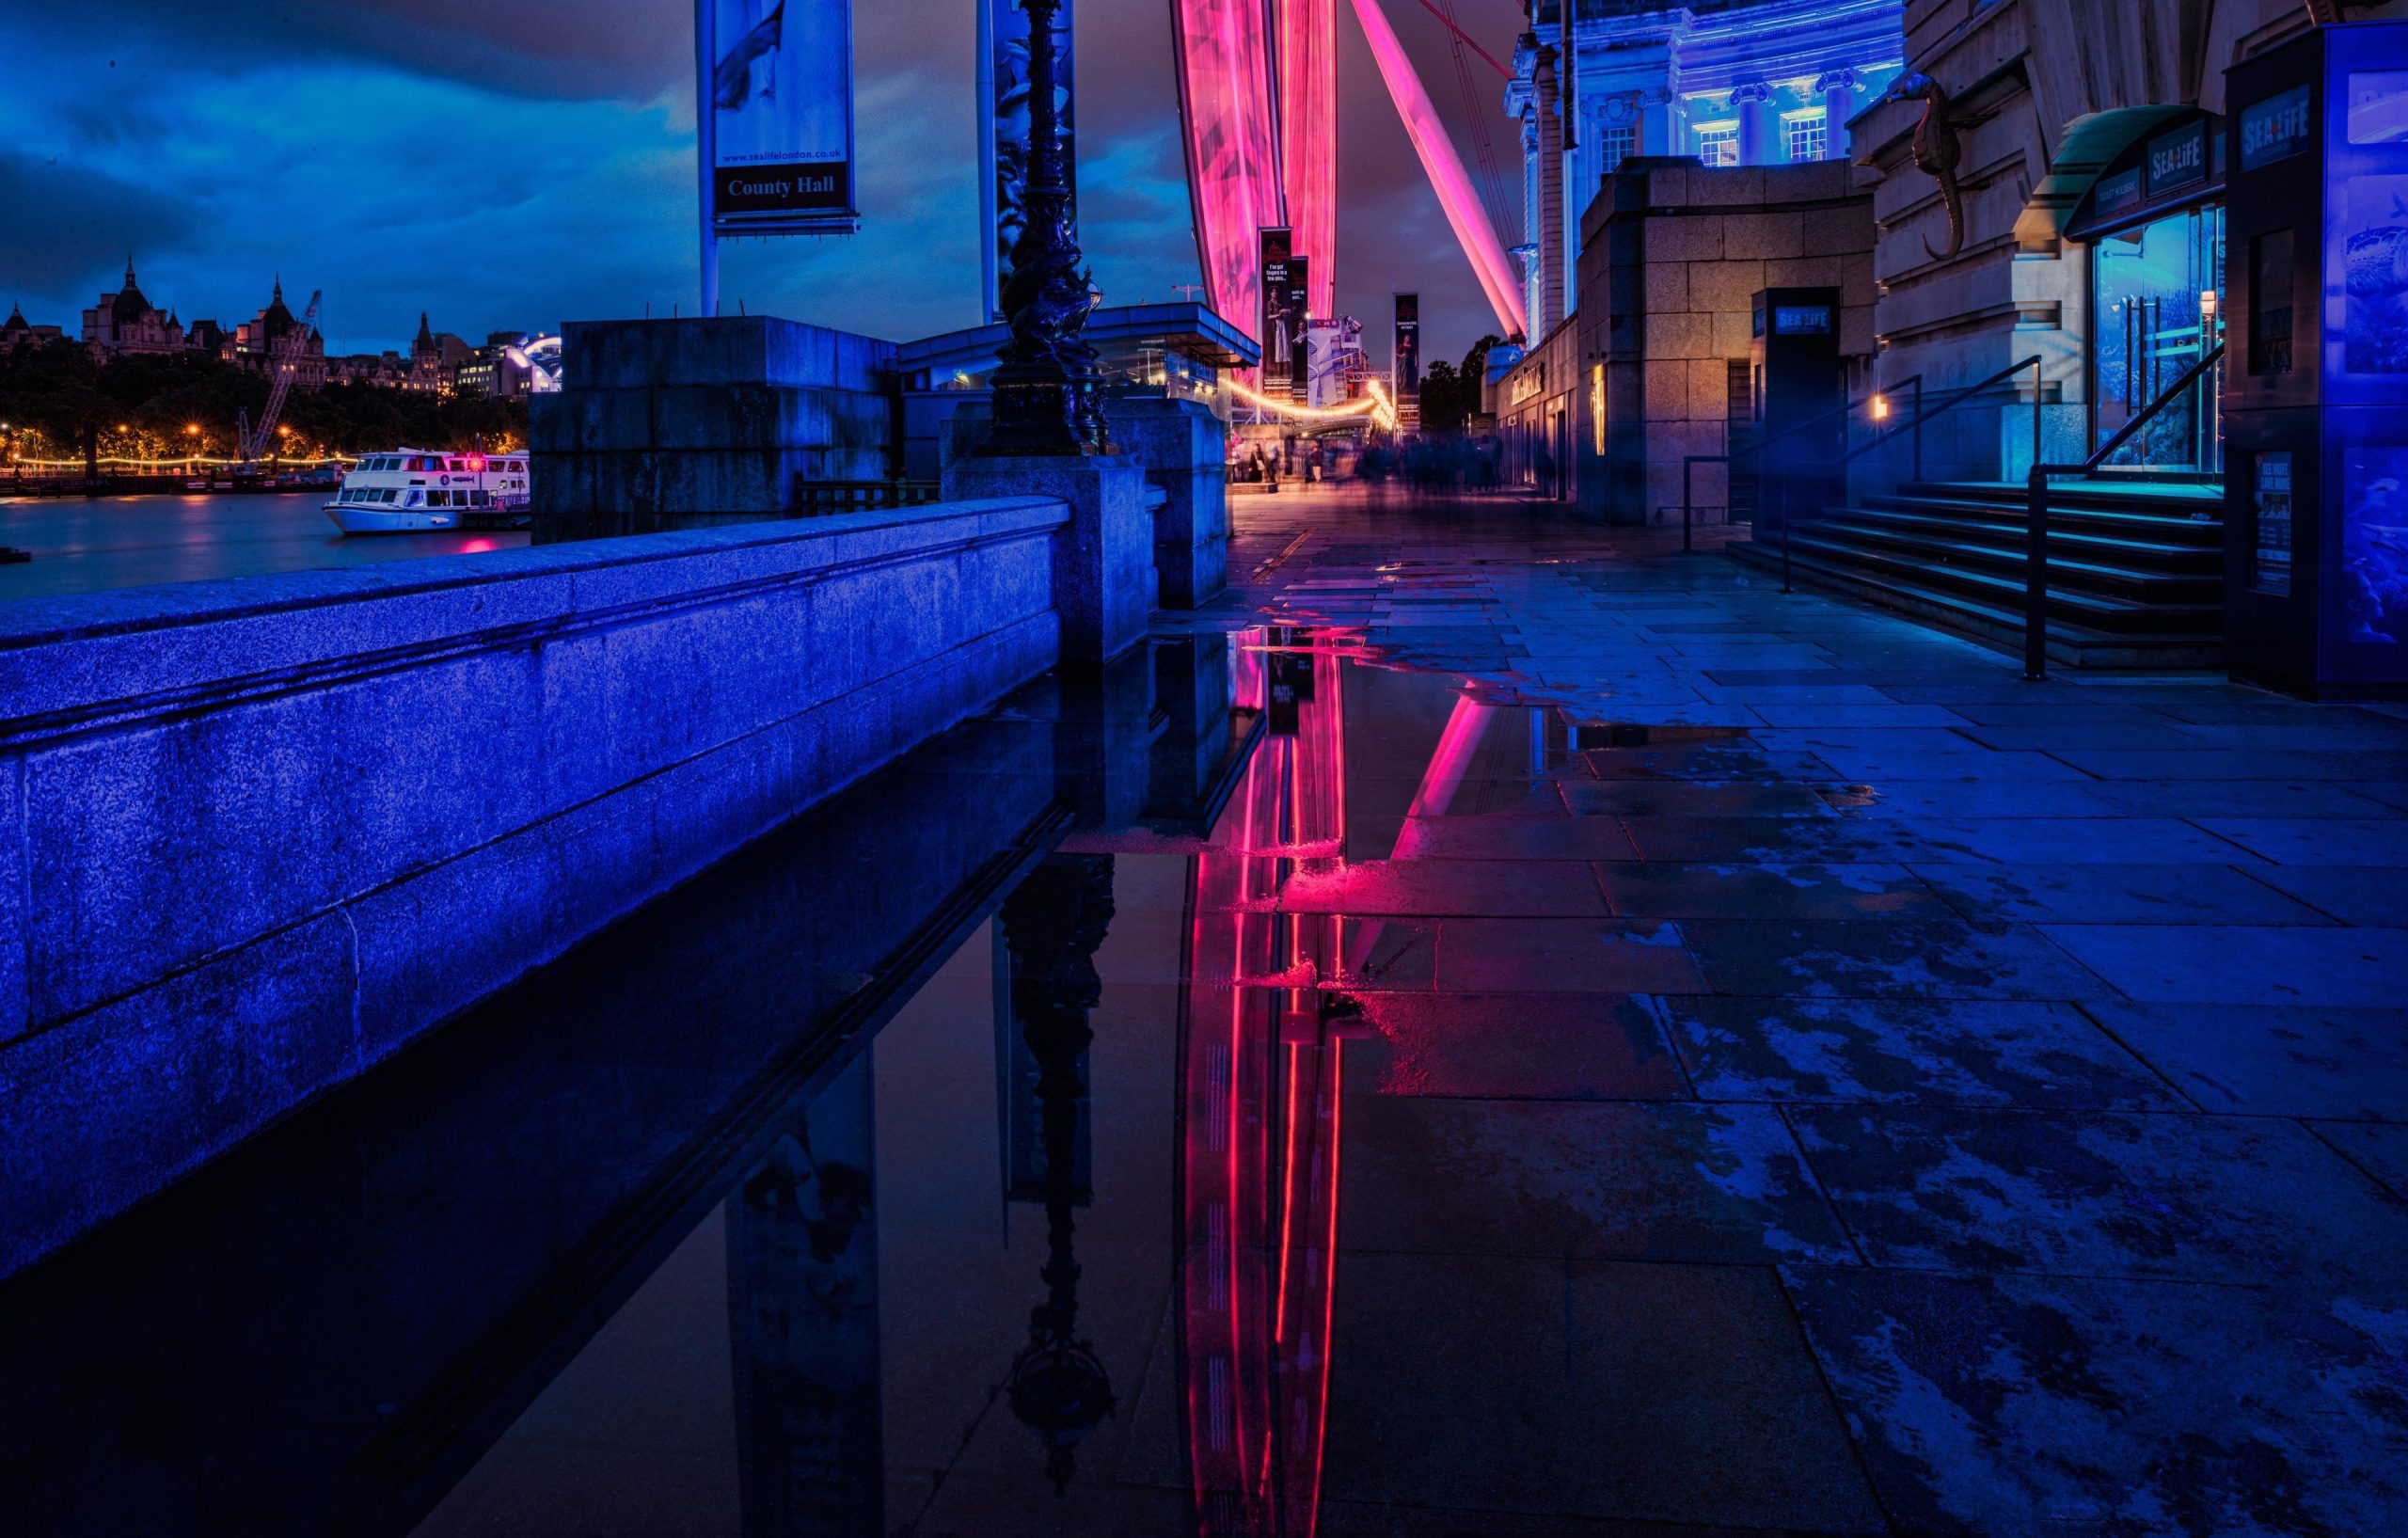 Captivating night shot of the London Eye captured by a commercial photographer in London. The long exposure image, taken from a low angle, showcases the iconic wheel in motion, creating a mesmerizing blur effect. Reflecting in a puddle, the illuminated wheel adds a sense of drama and uniqueness to the shot, perfect for the 'Epic London' project by a marketing company.